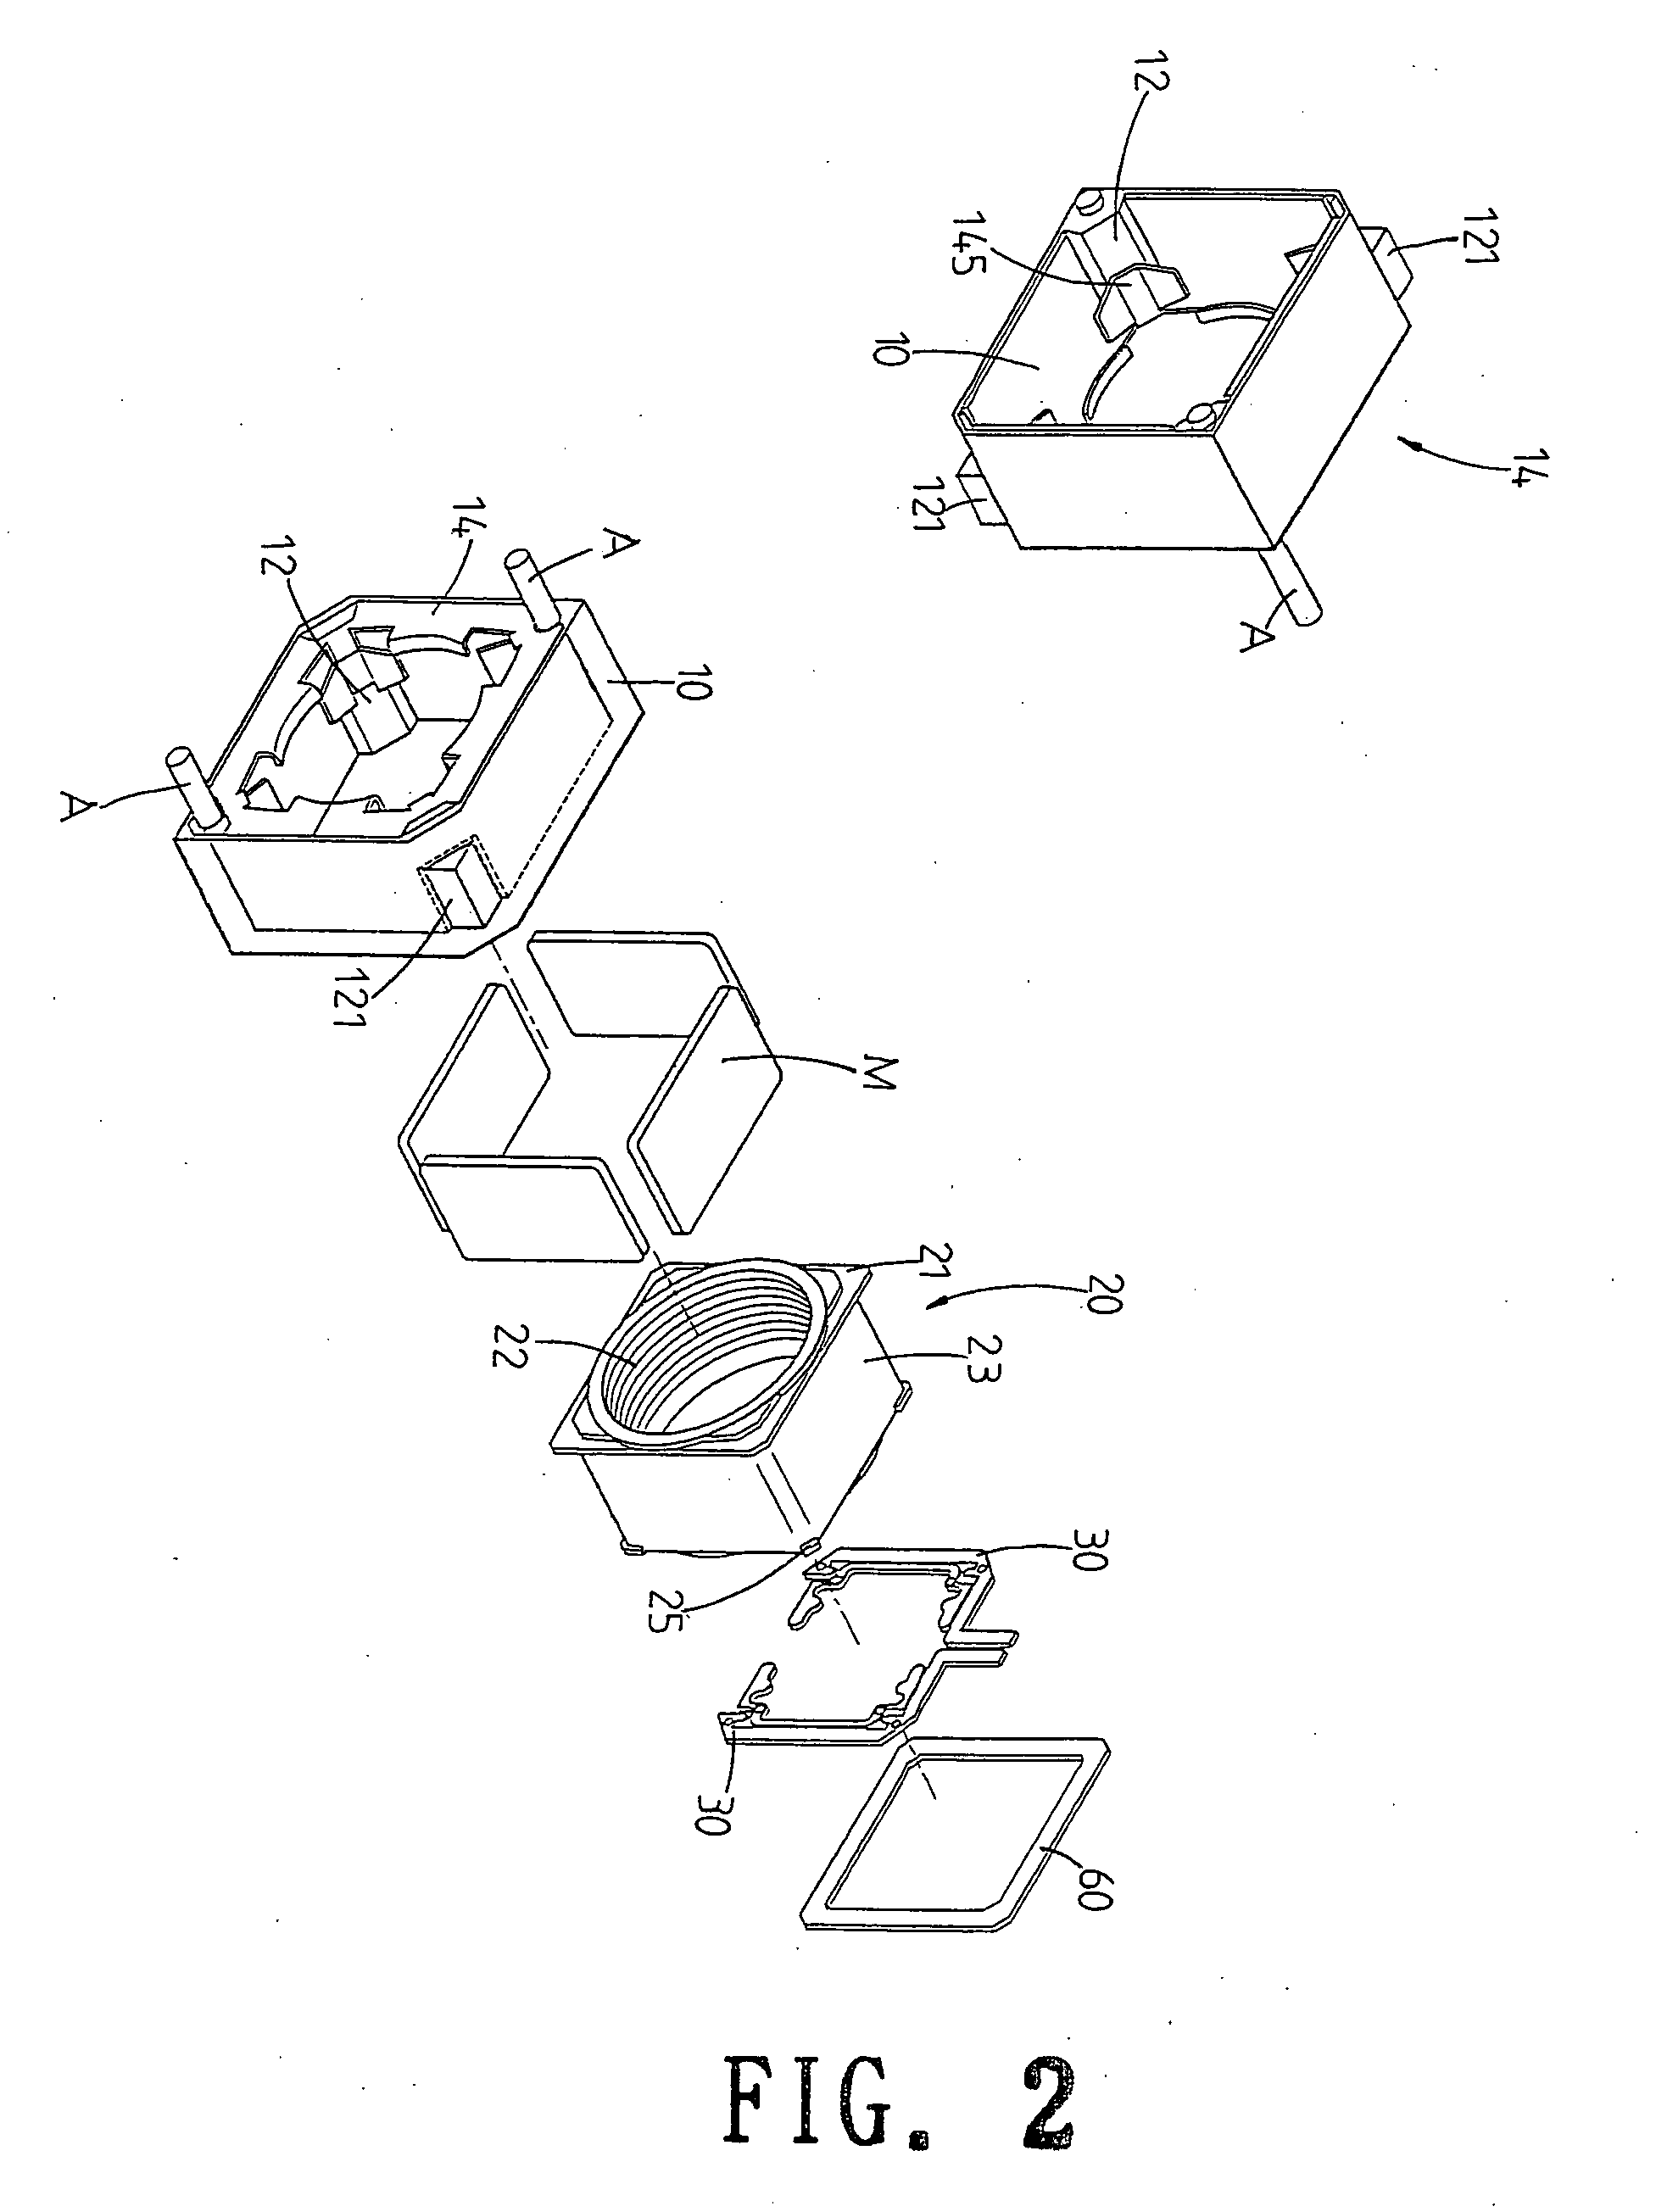 High performance focusing actuator of a voice coil motor